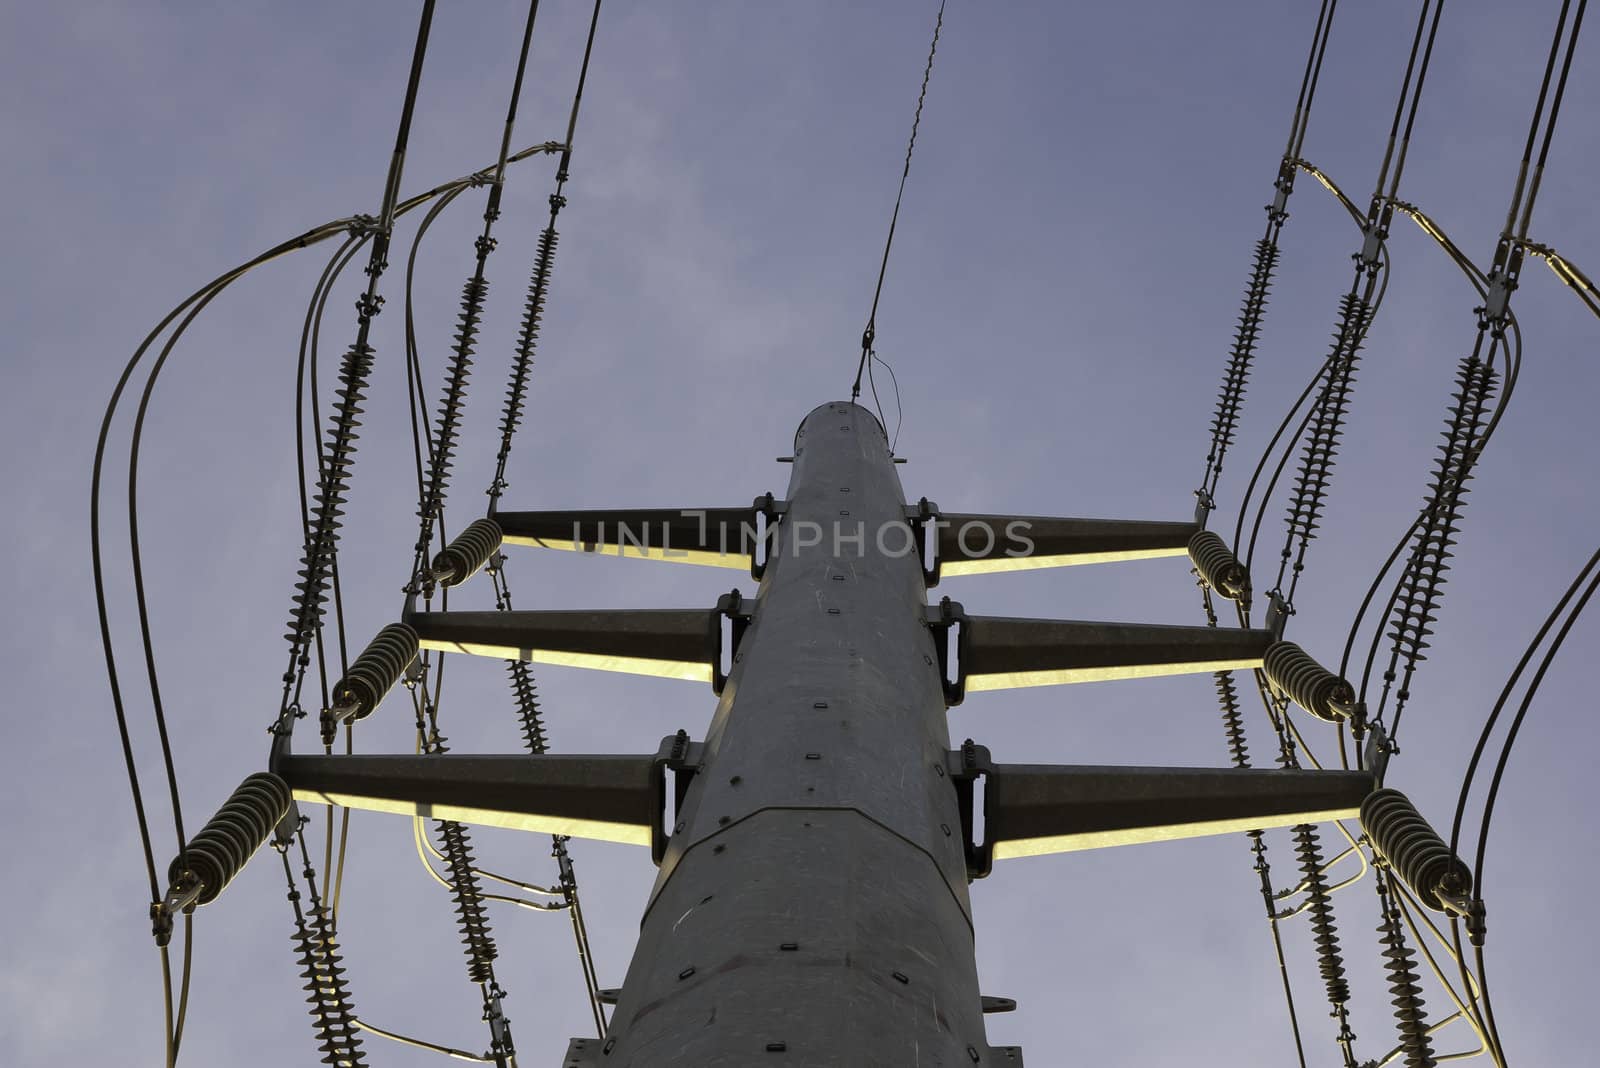 large high voltage power lines on pole viewed from directly beneath